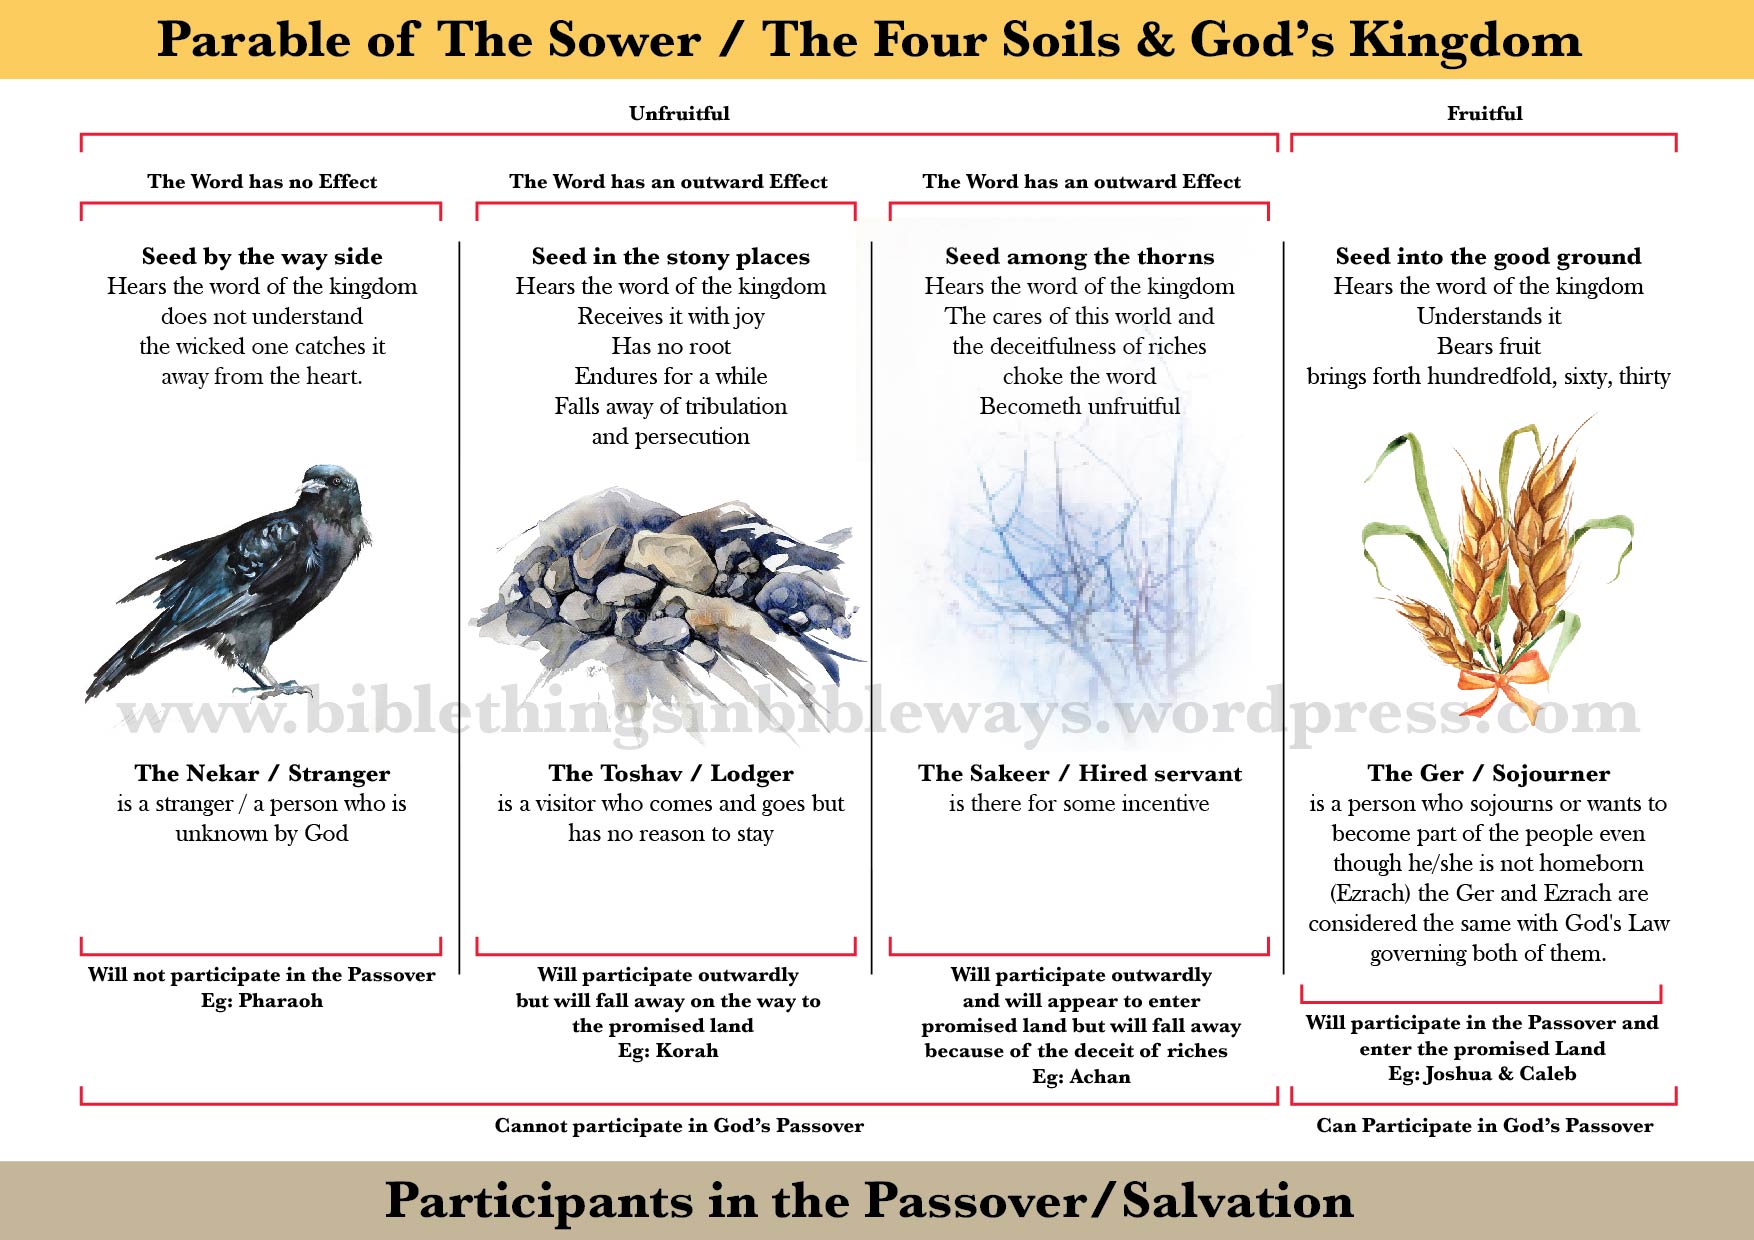 The Passover and the Parable of the Sower | Bible things in Bible ways